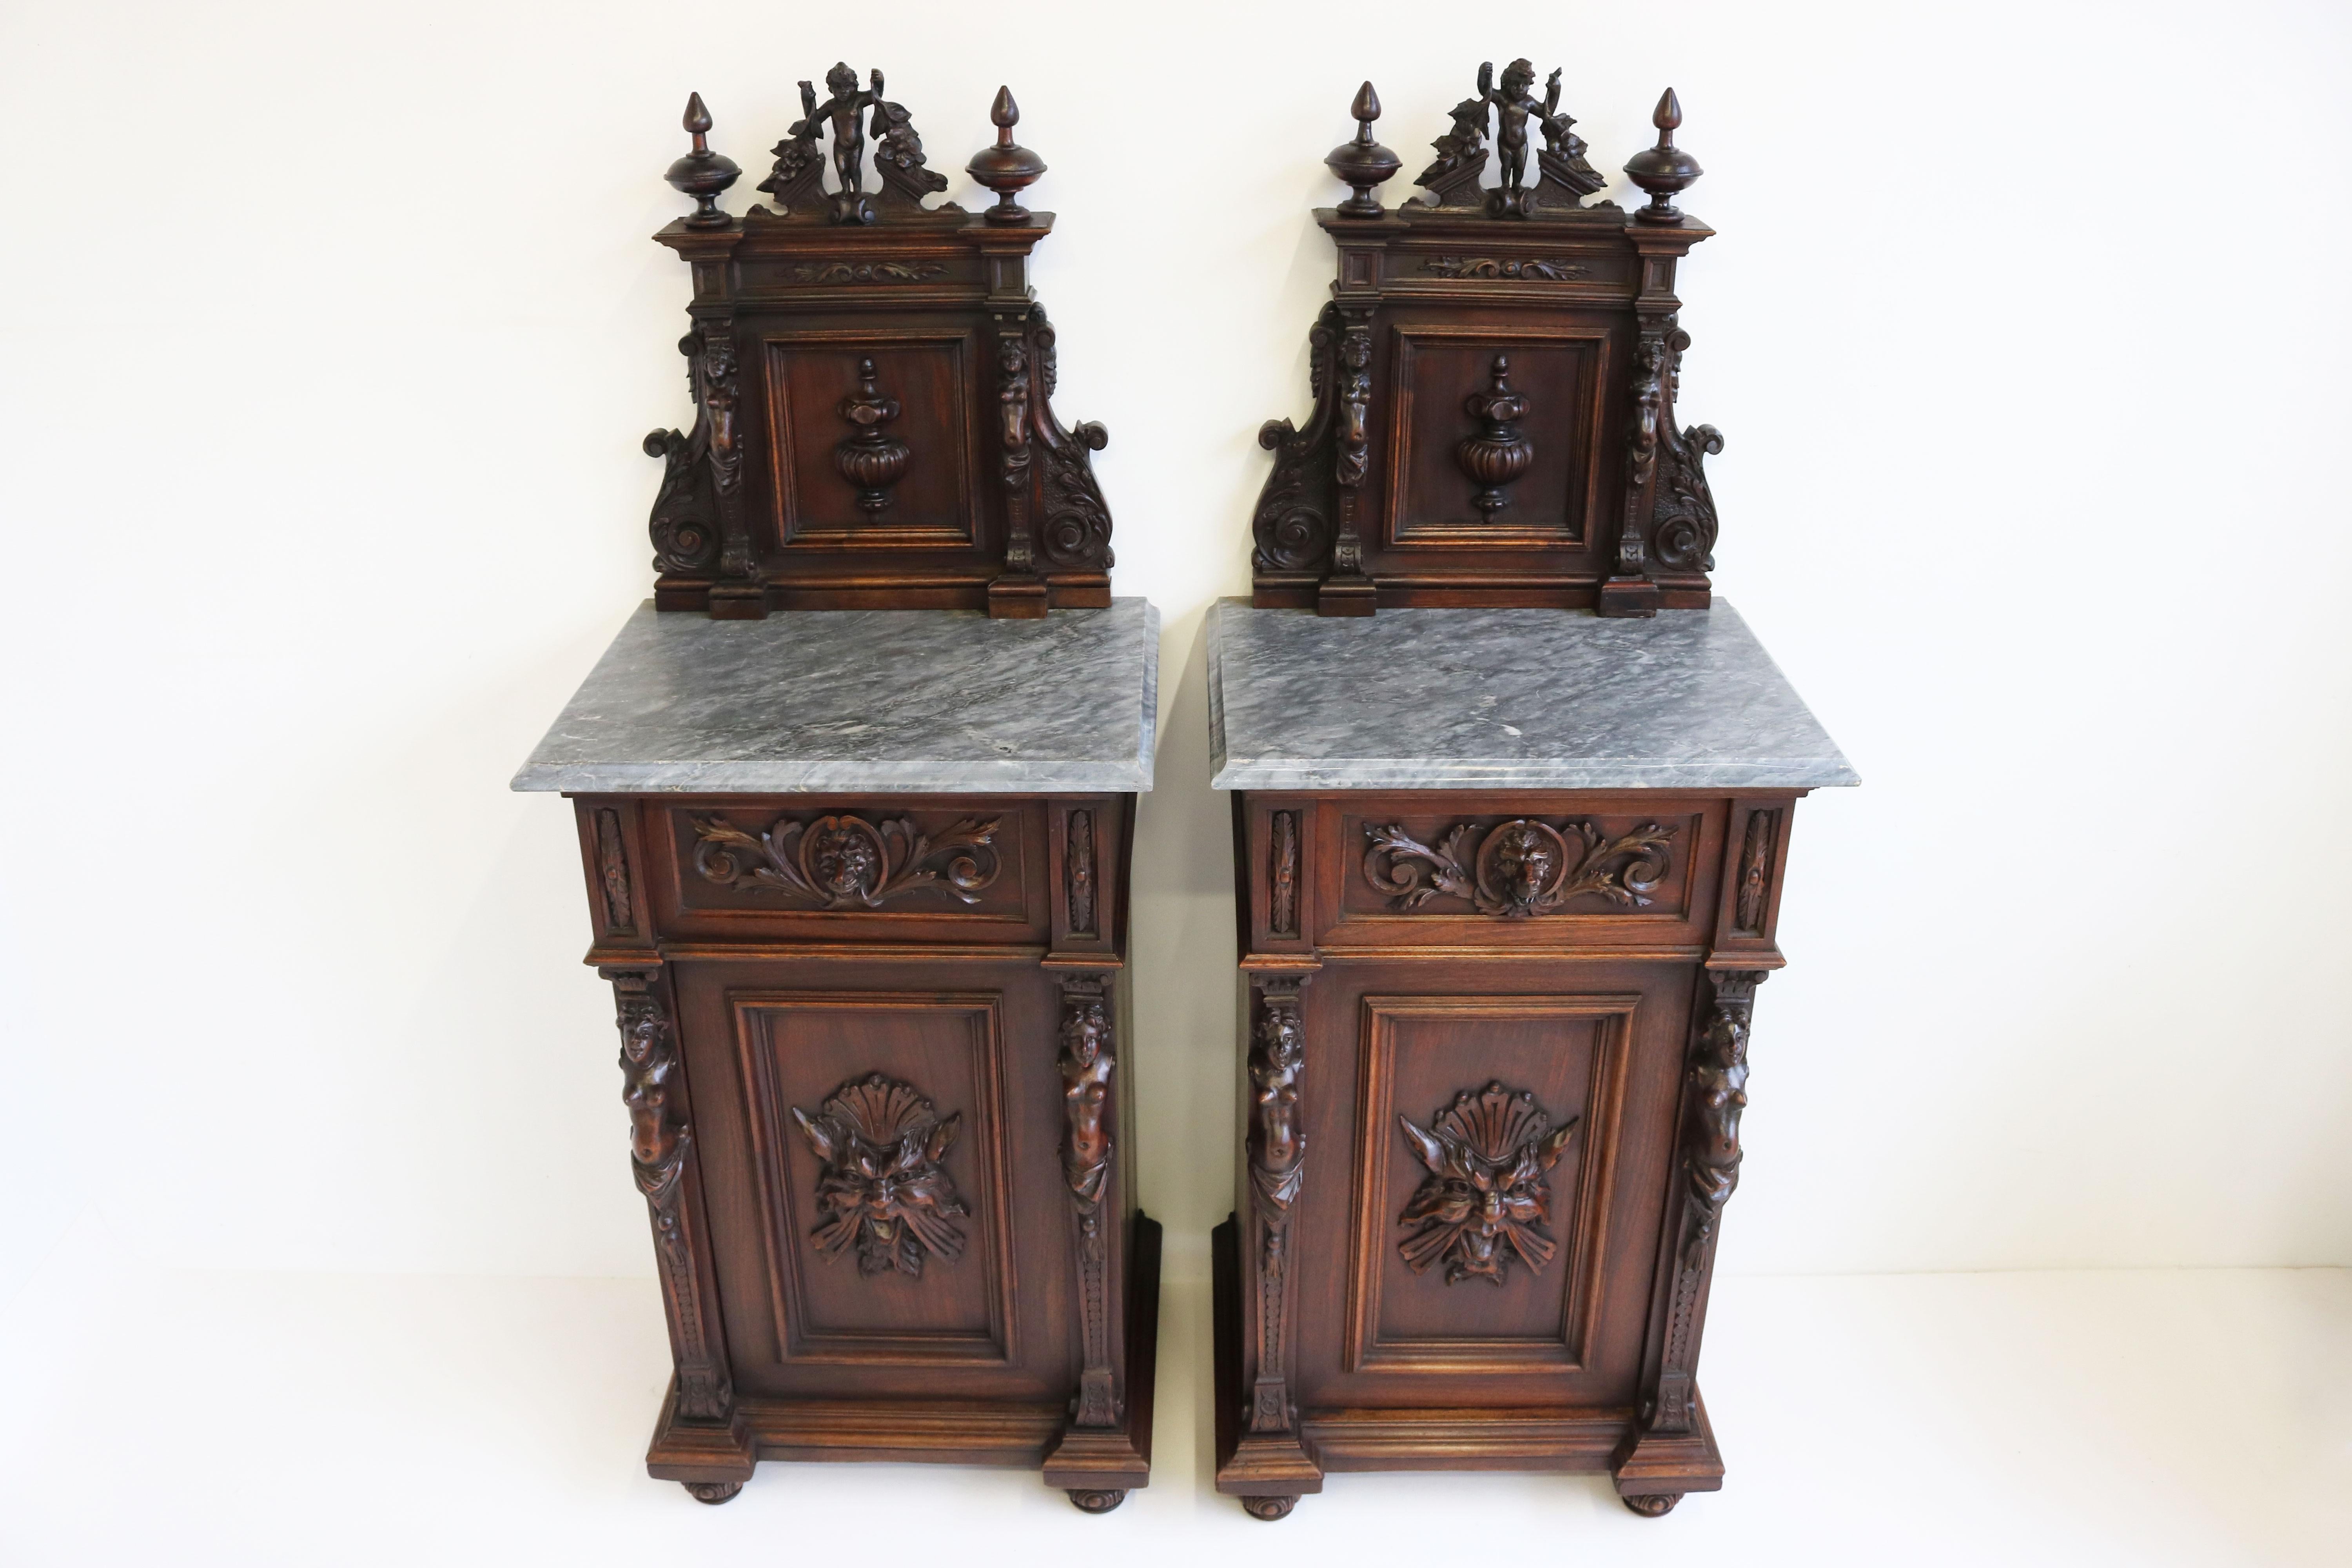 Marble Antique 19th Century Italian Renaissance Revival Bedside Tables / Nightstands For Sale